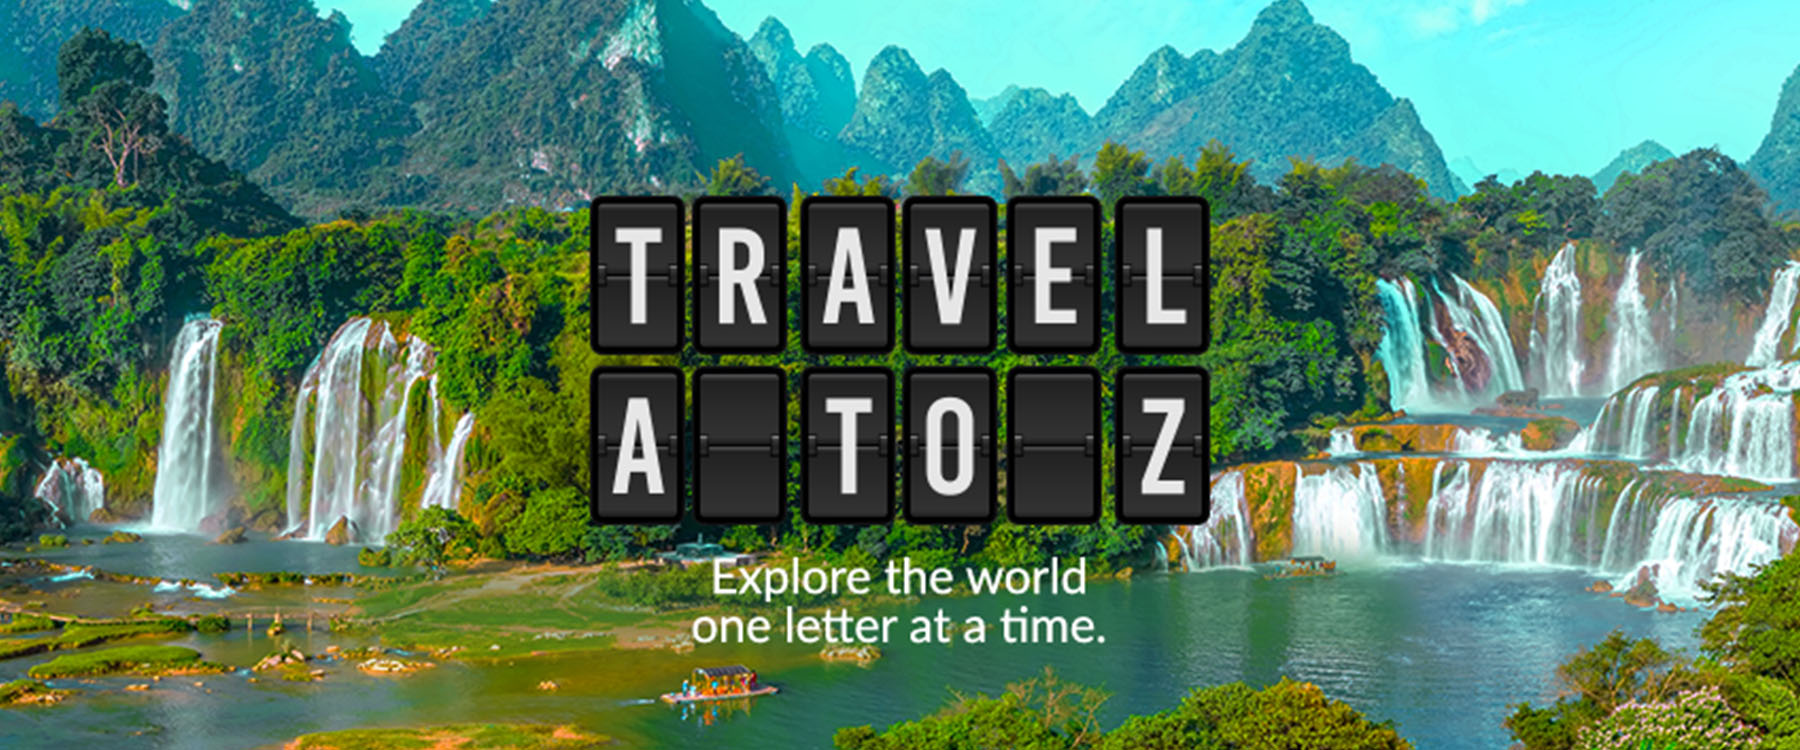 travel a to z